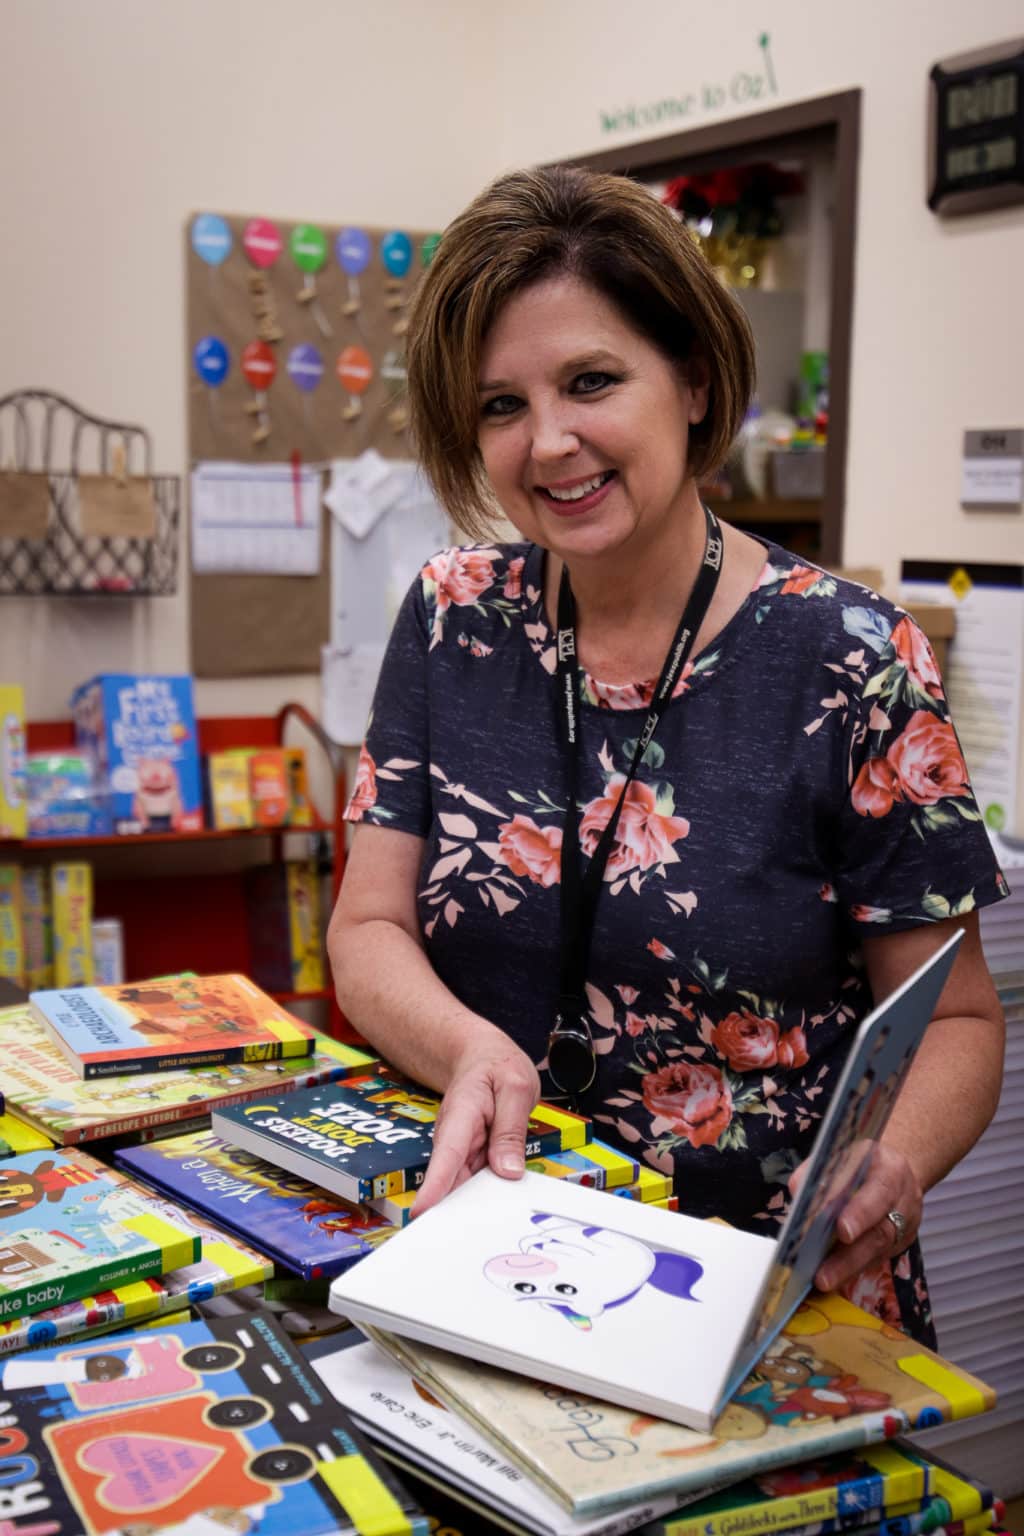 Children's Outreach Librarian Sharon chooses books to deliver to preschools.